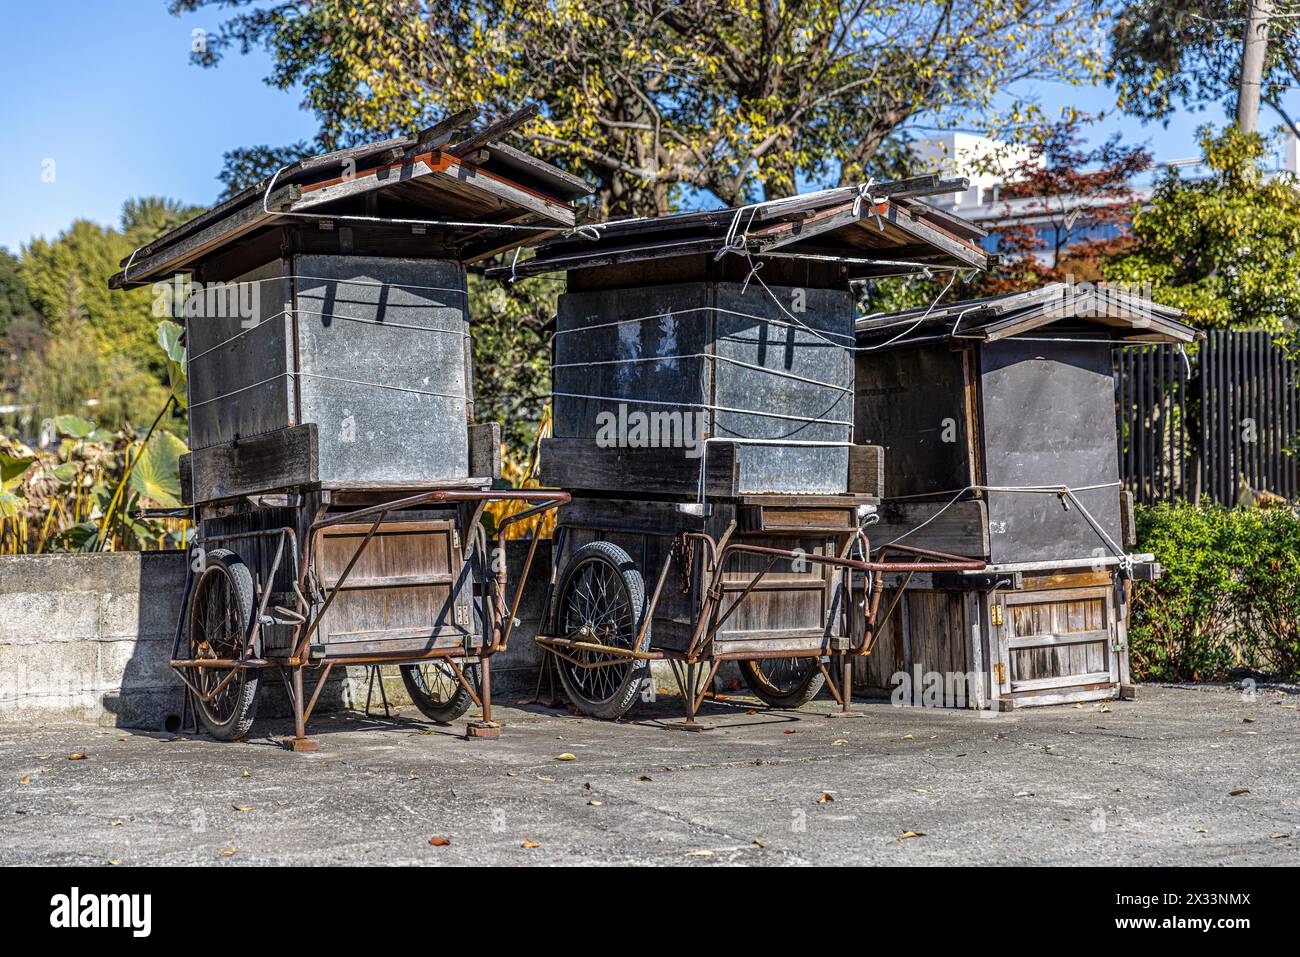 Row of empty street food carts with wheels in Ueno, Tokyo Stock Photo